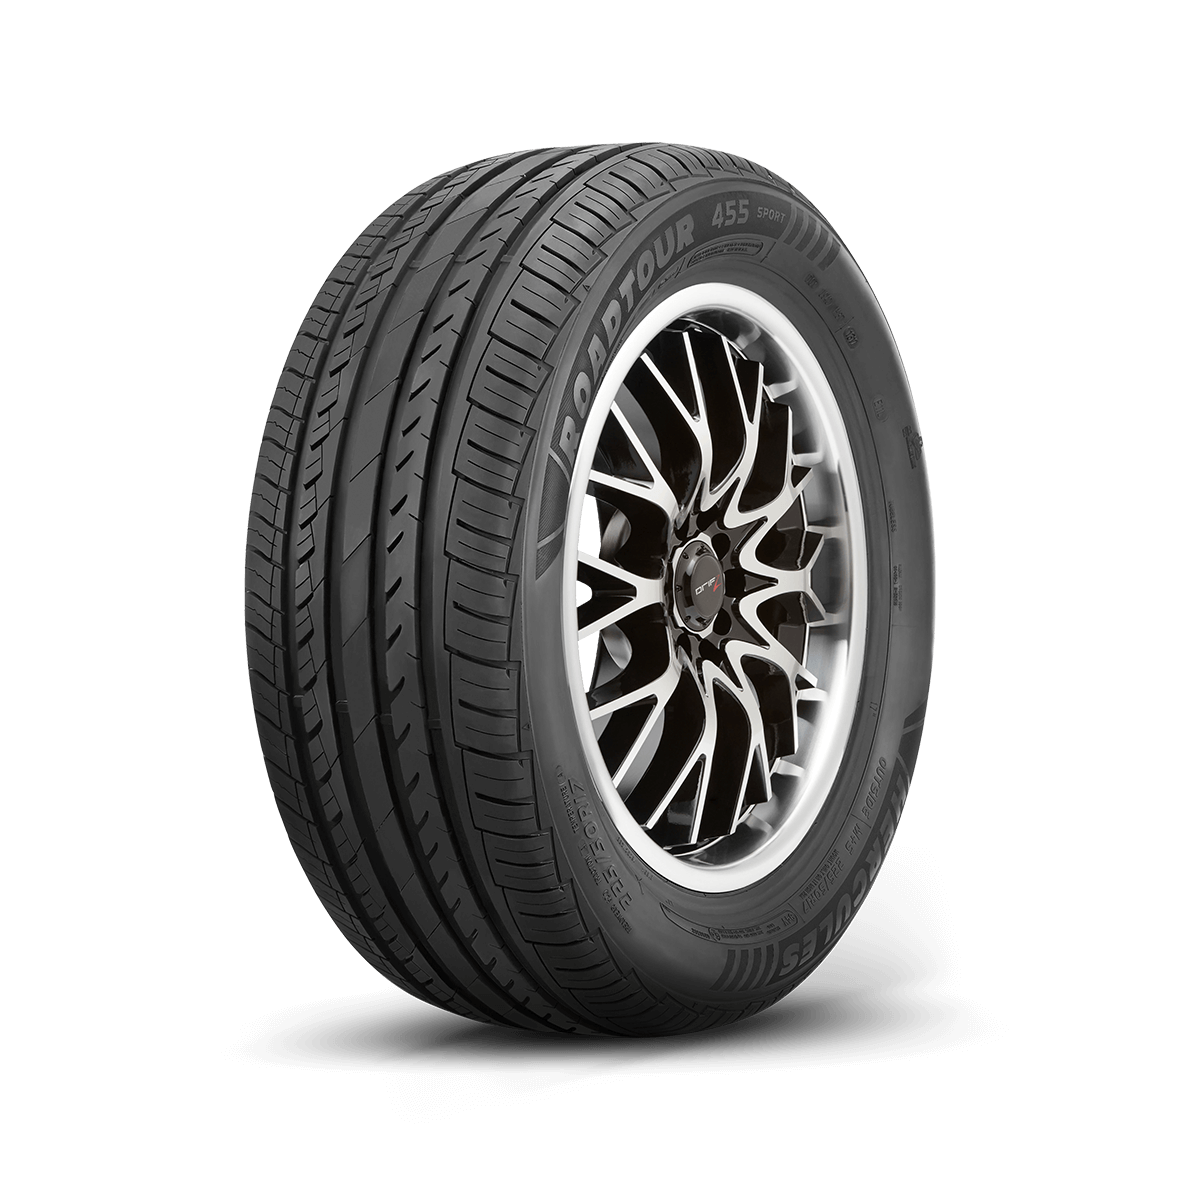 Left side tread and rim view of the Roadtour 455 Sport tire on a white background. 